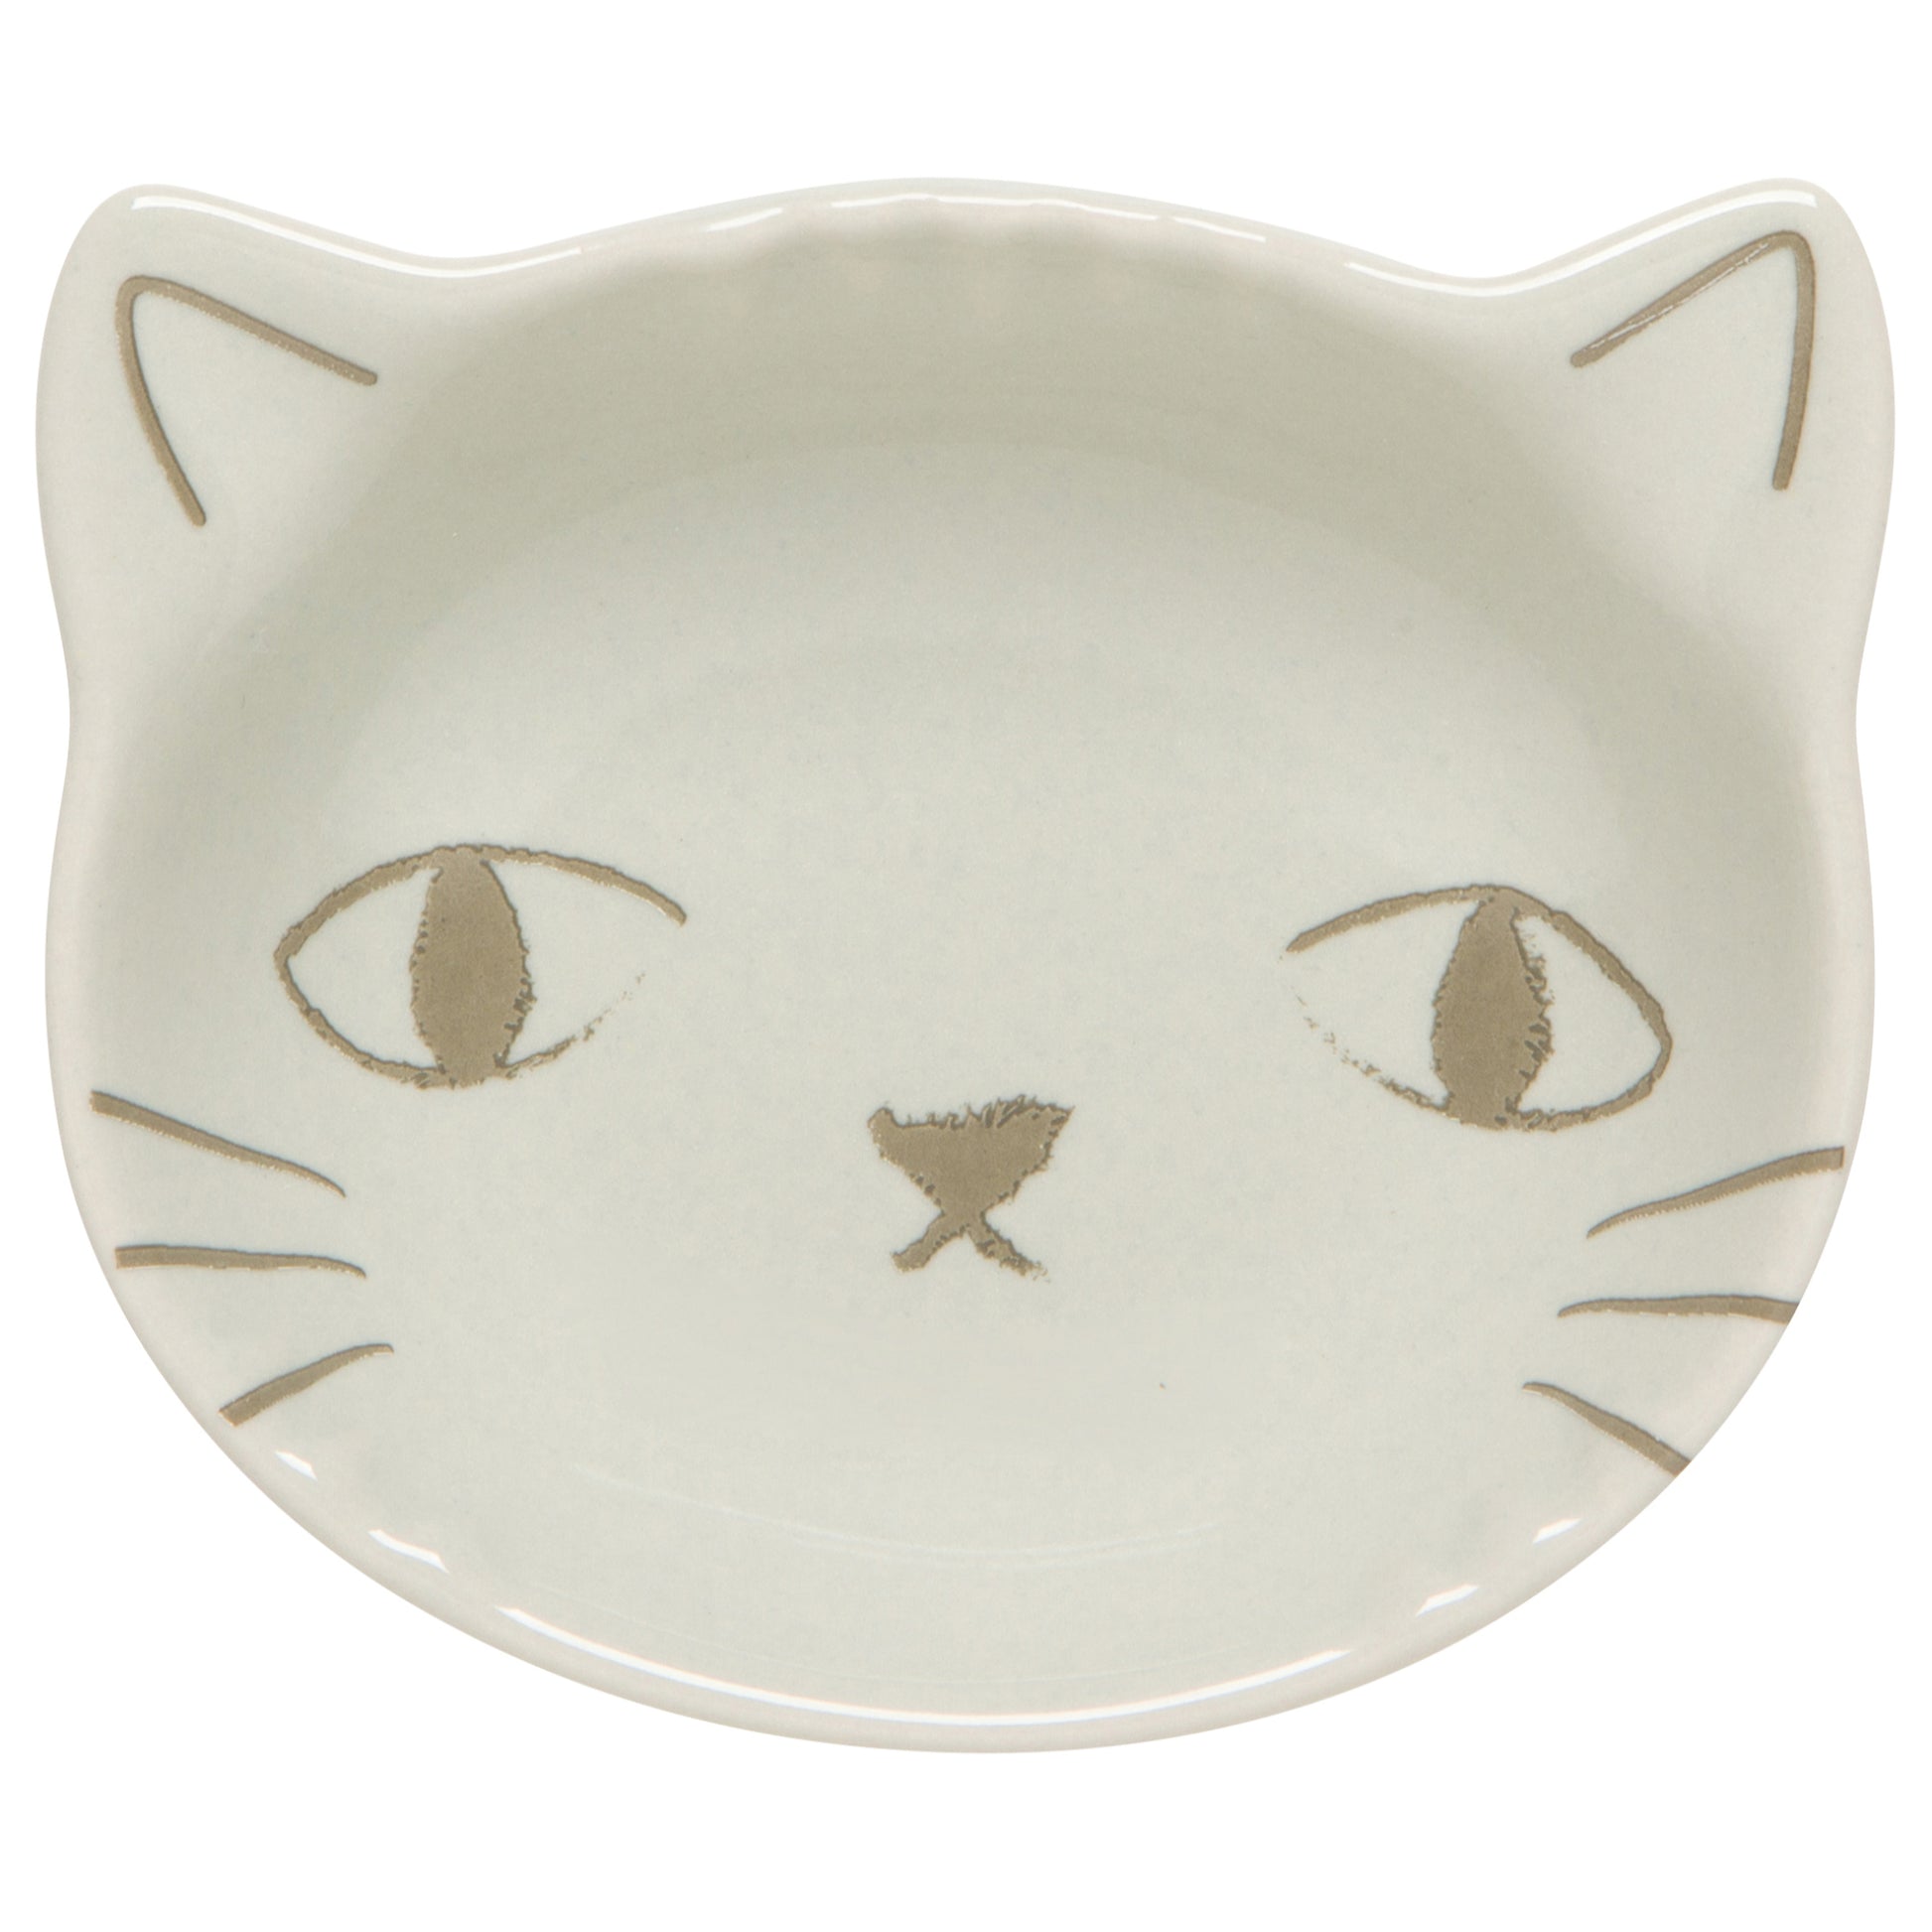 "The Cats Meow": Pinch Bowls (Set of 6) - Tiny Tiger Gift Shop